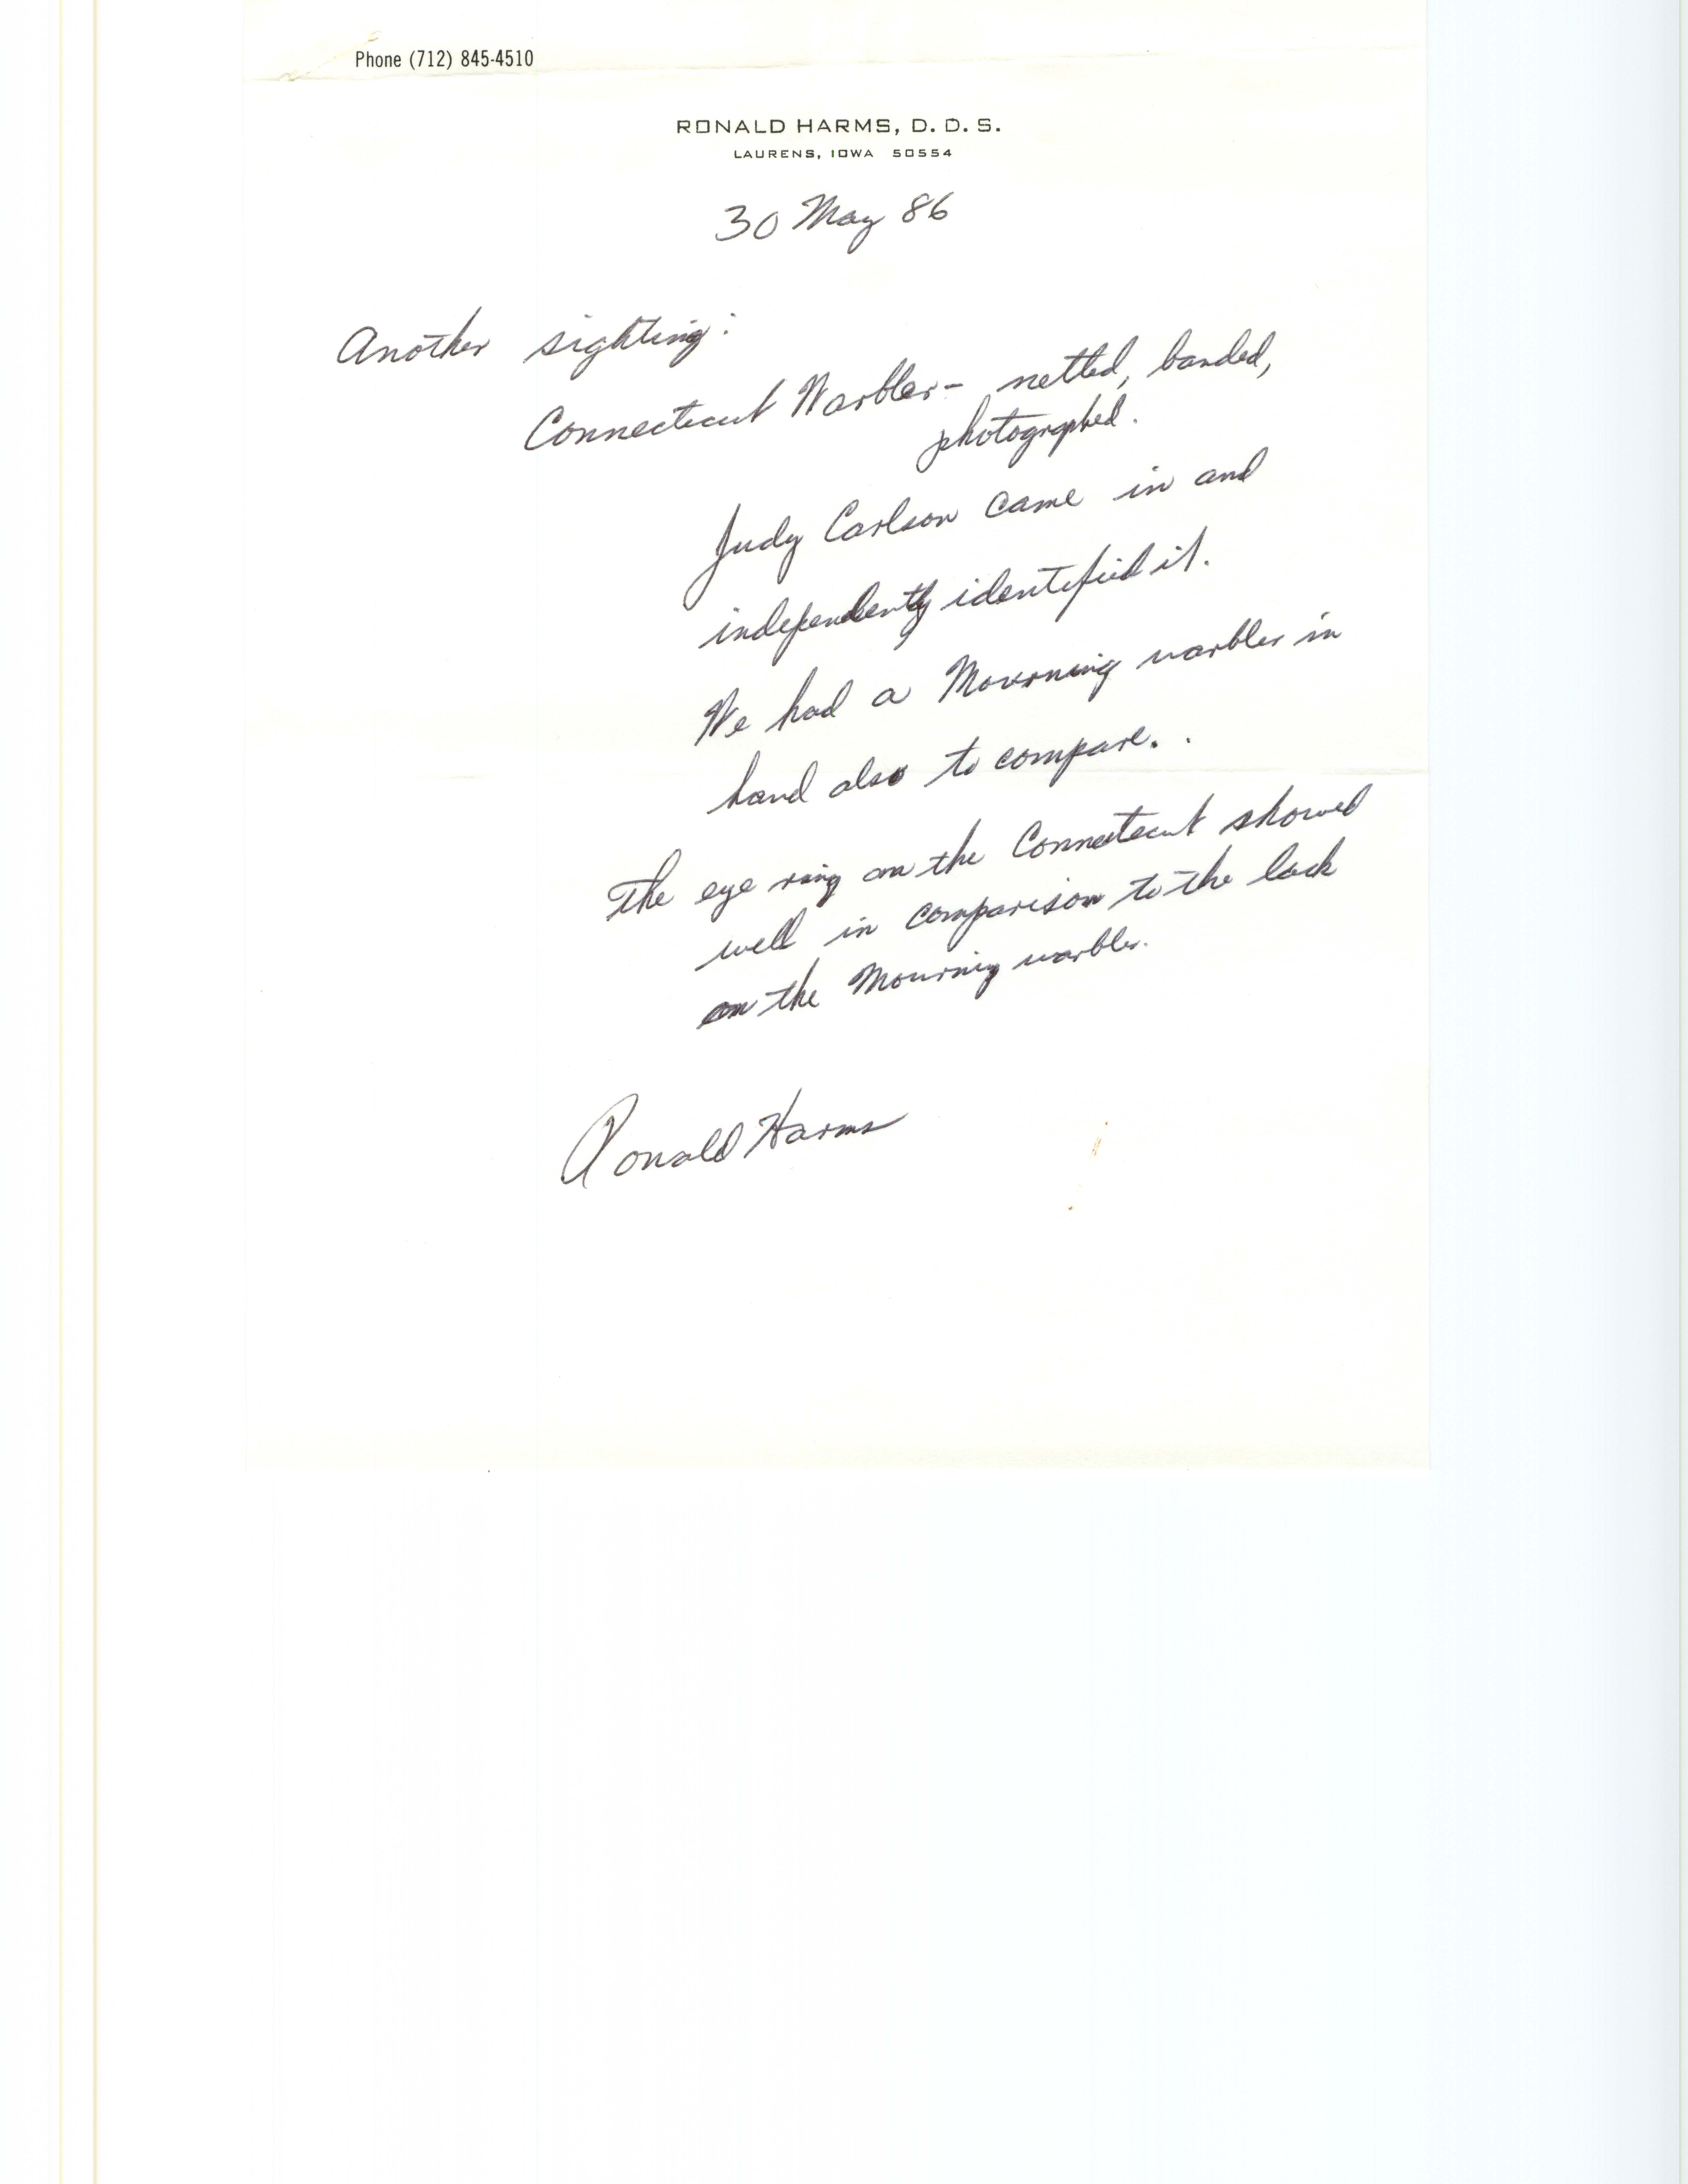 Ronald Harms letter to Robert Myers regarding Connecticut Warbler, May 30, 1986